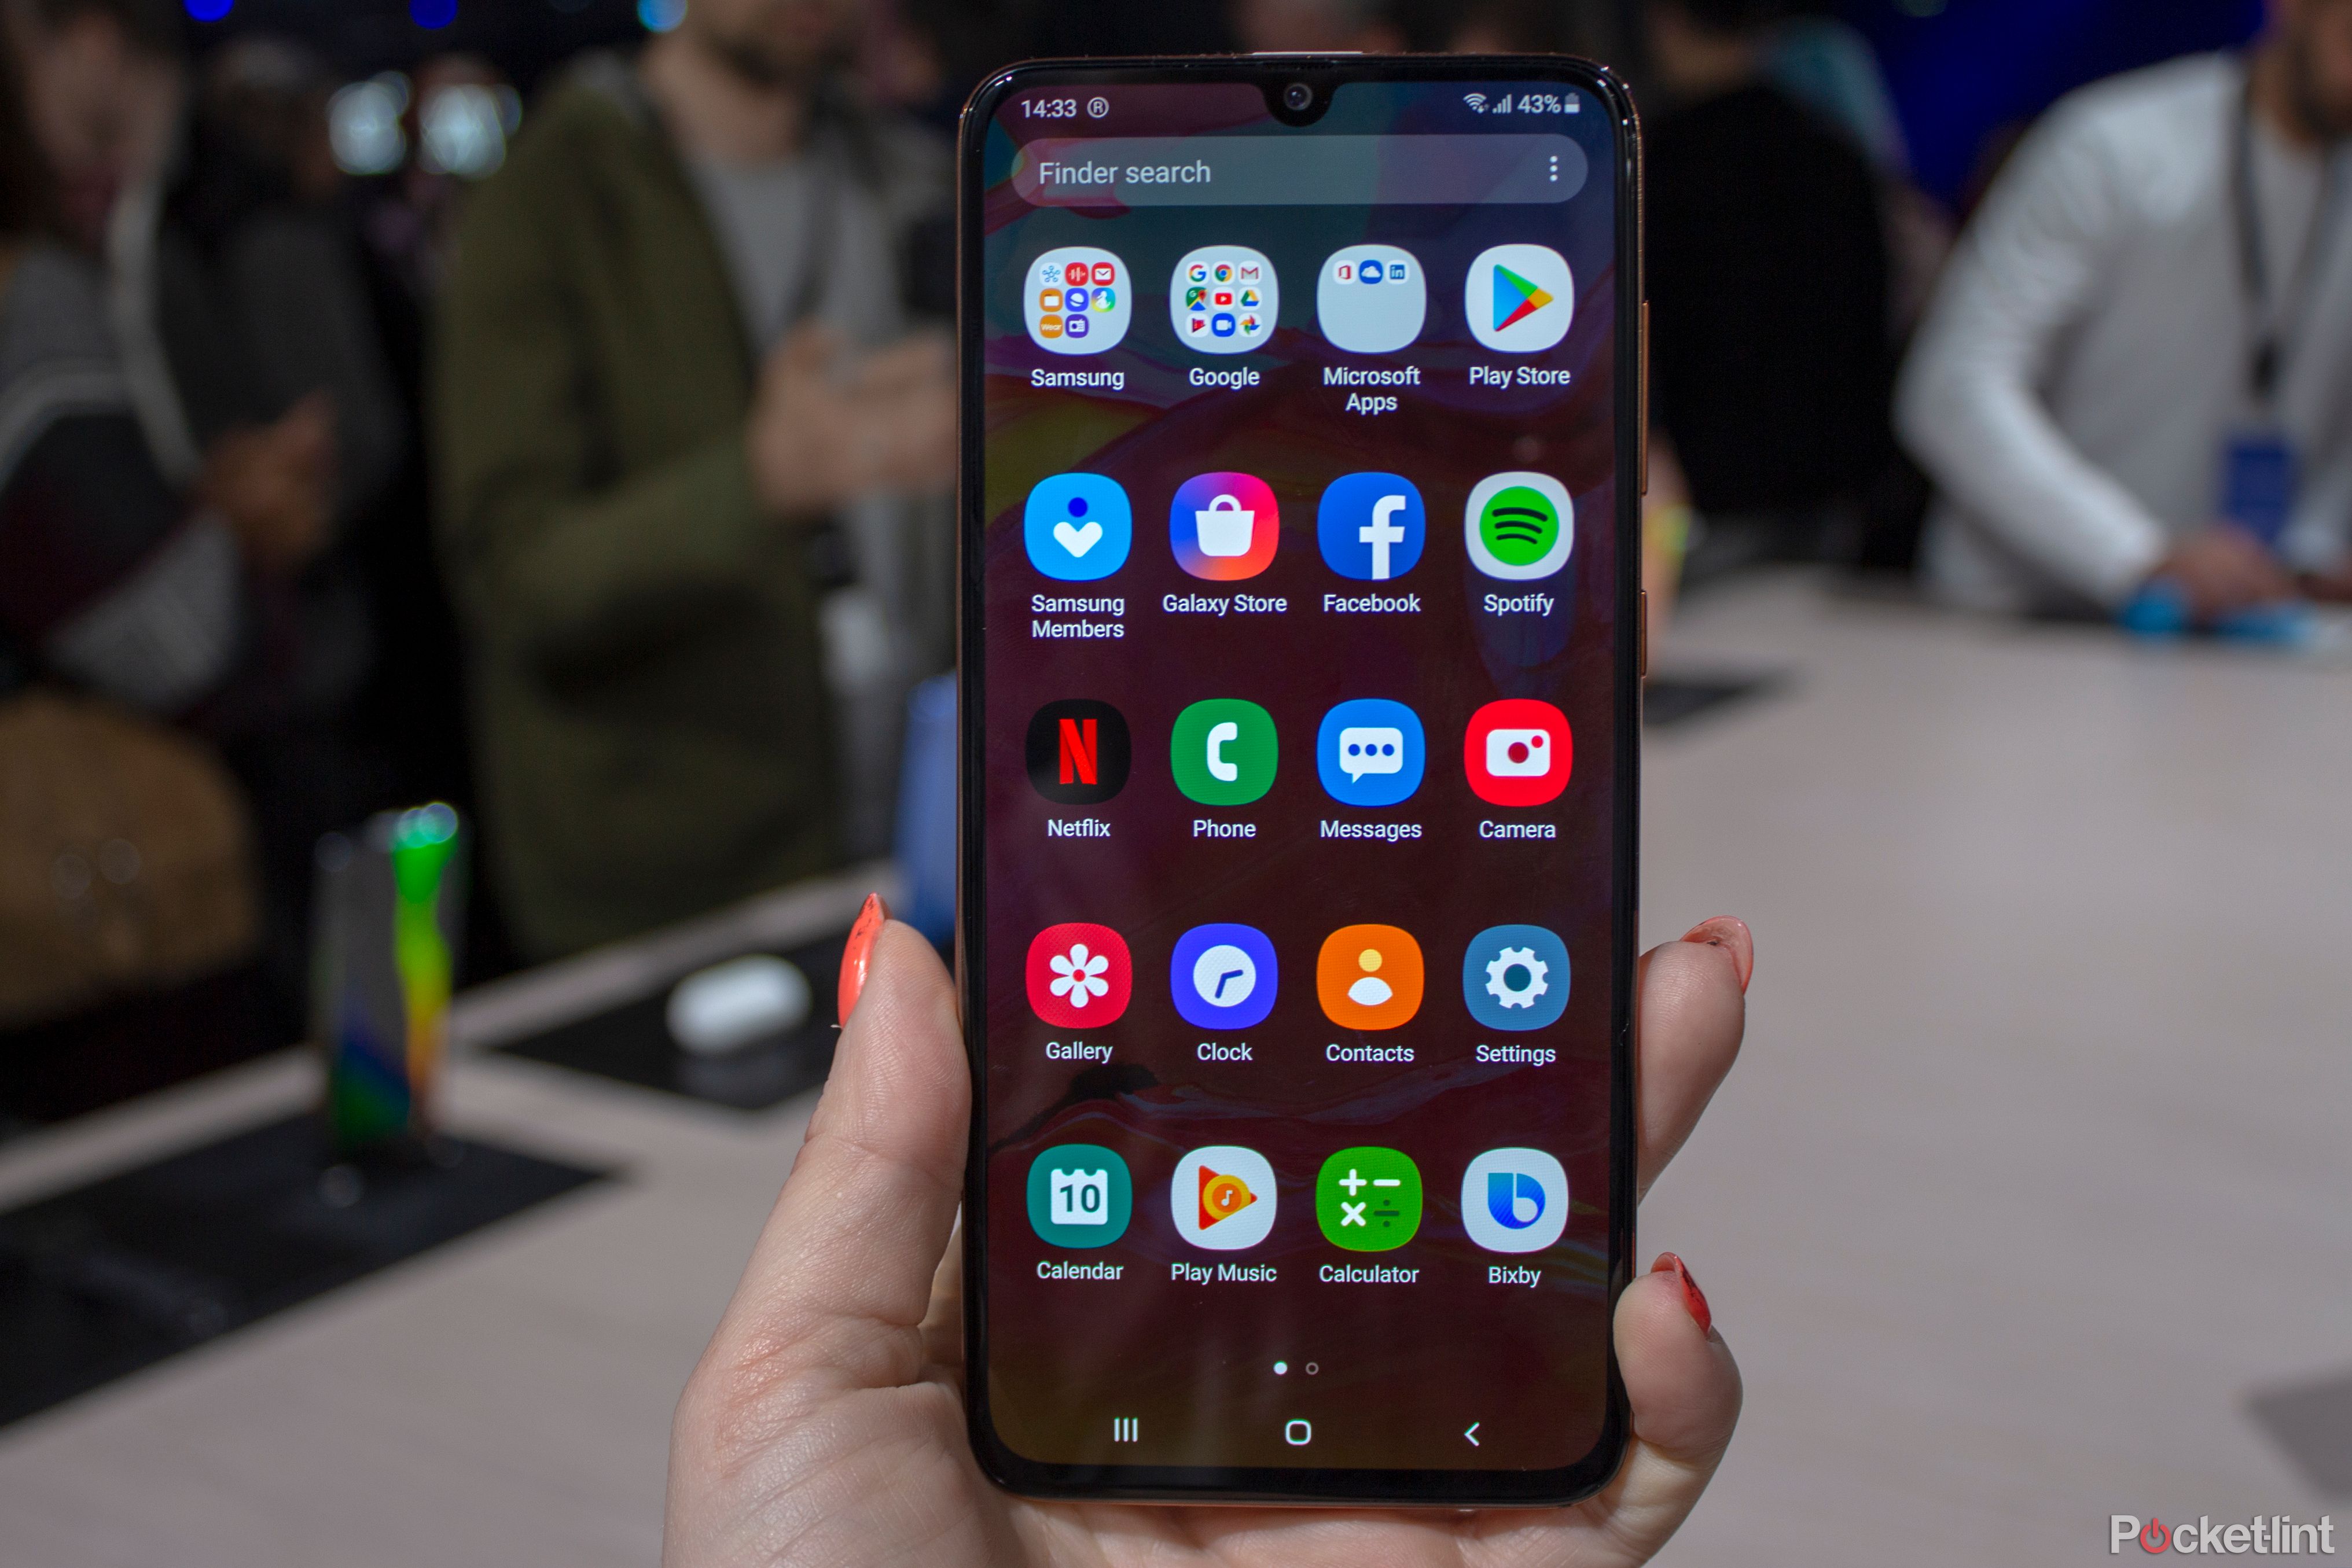 Samsung Galaxy A70 initial review product images image 11